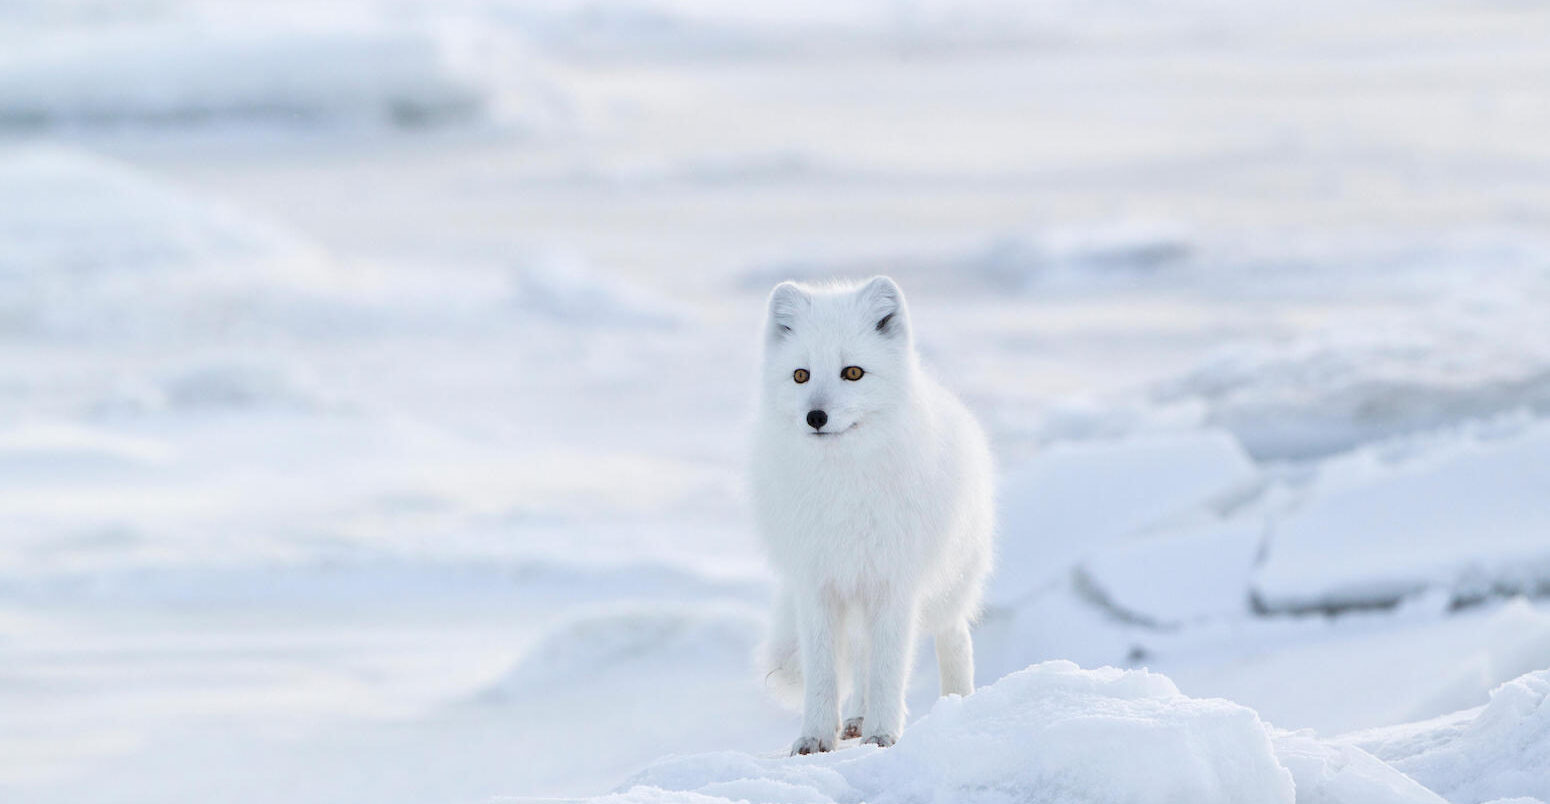 Decline In Snow Cover Could Push Some Creatures To Extinction : Study